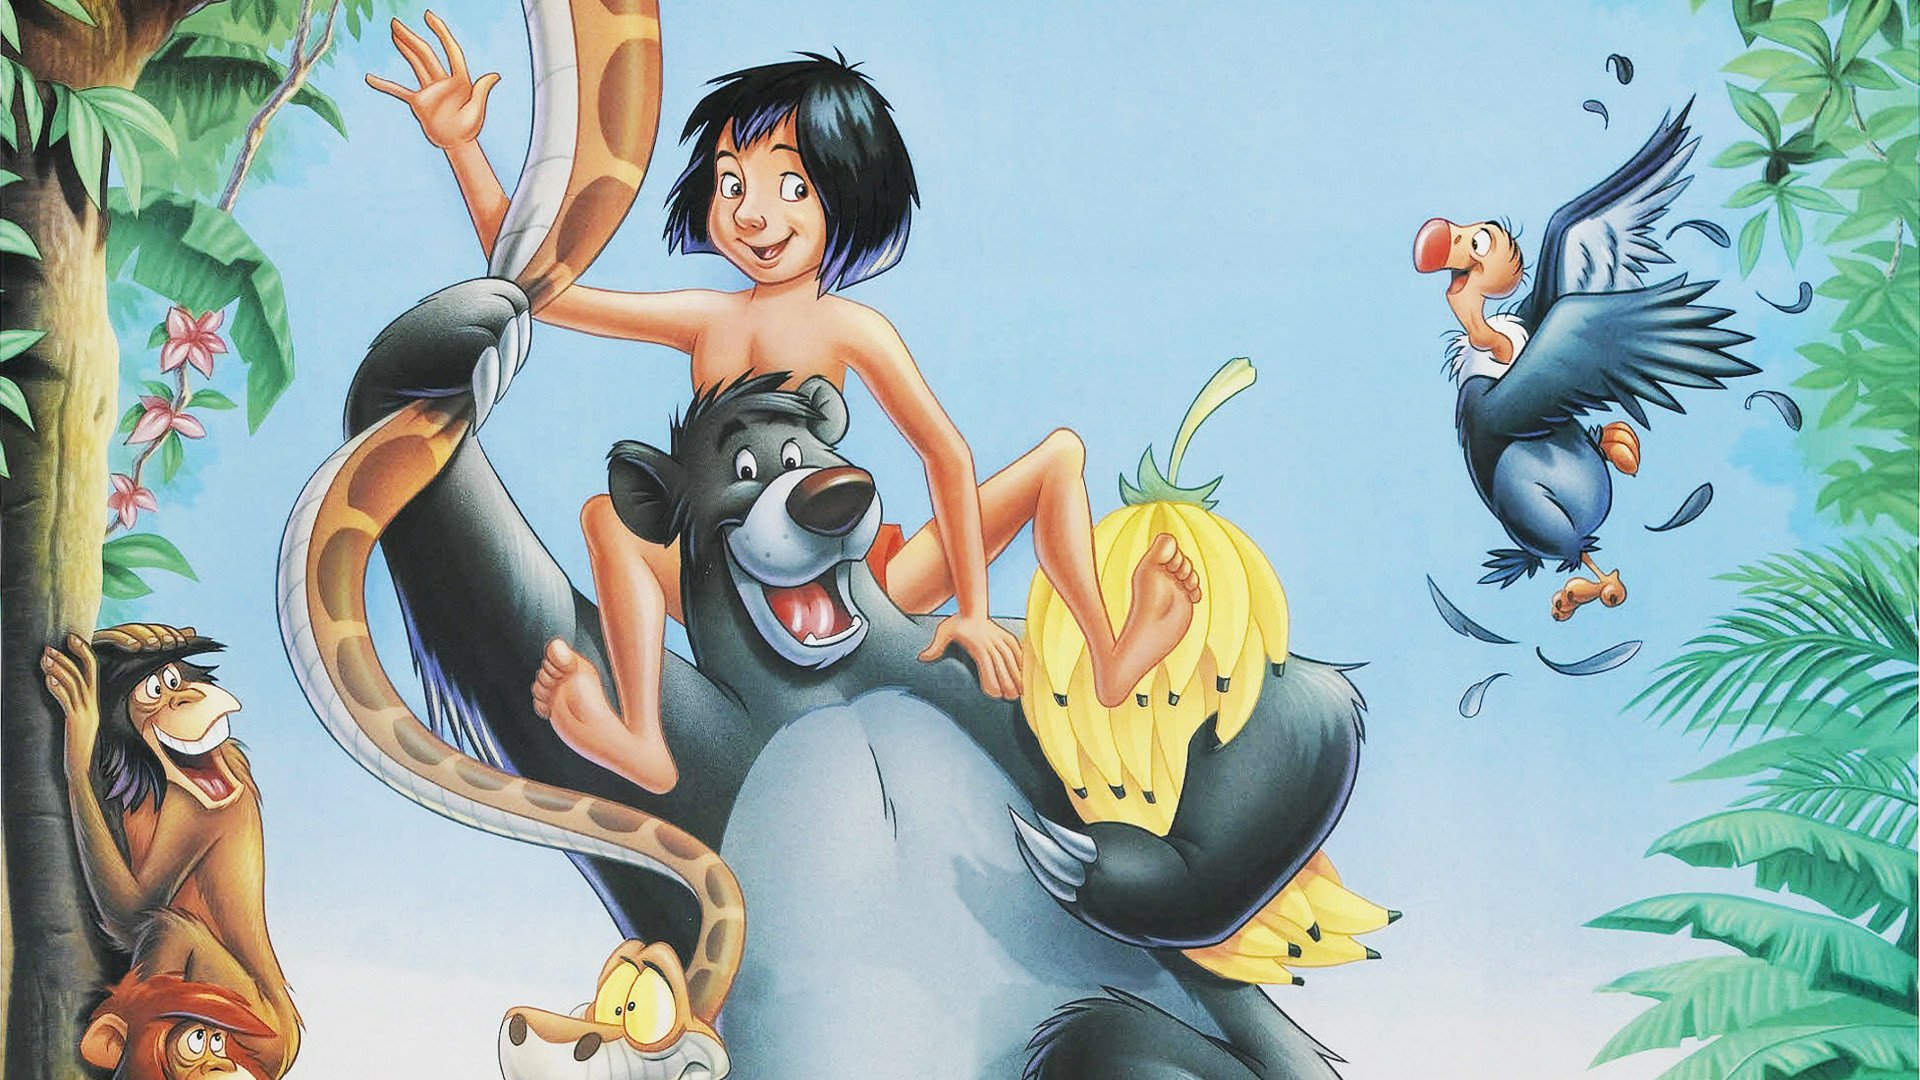 The Jungle Book instal the new for ios